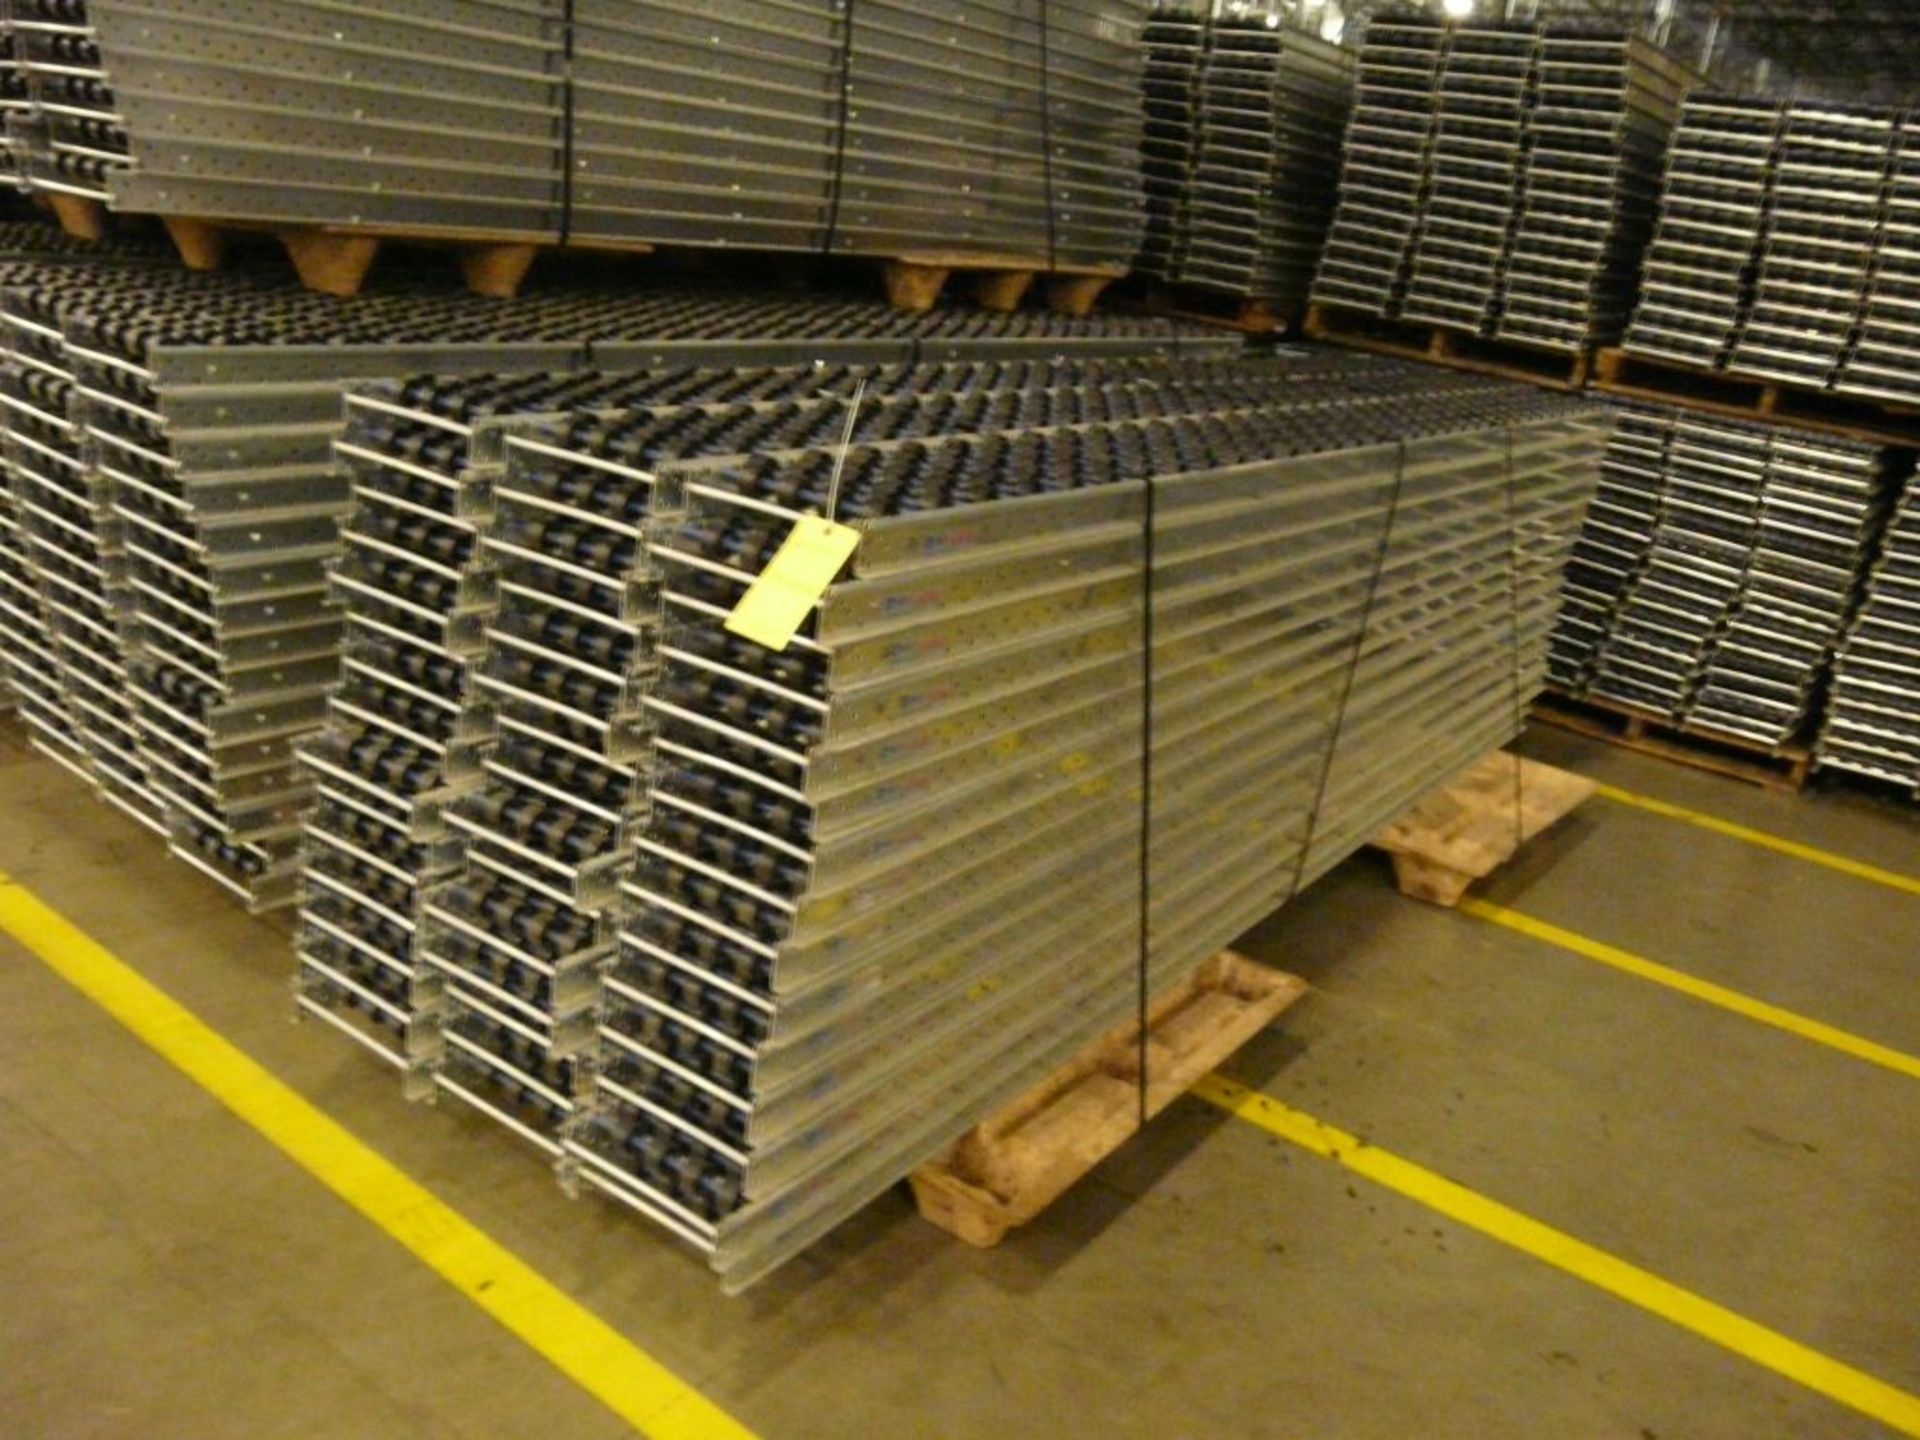 Lot of (90) SpanTrack Wheelbed Carton Flow Conveyors - 11.5'L x 11"W; Tag: 224232 - $30 Lot